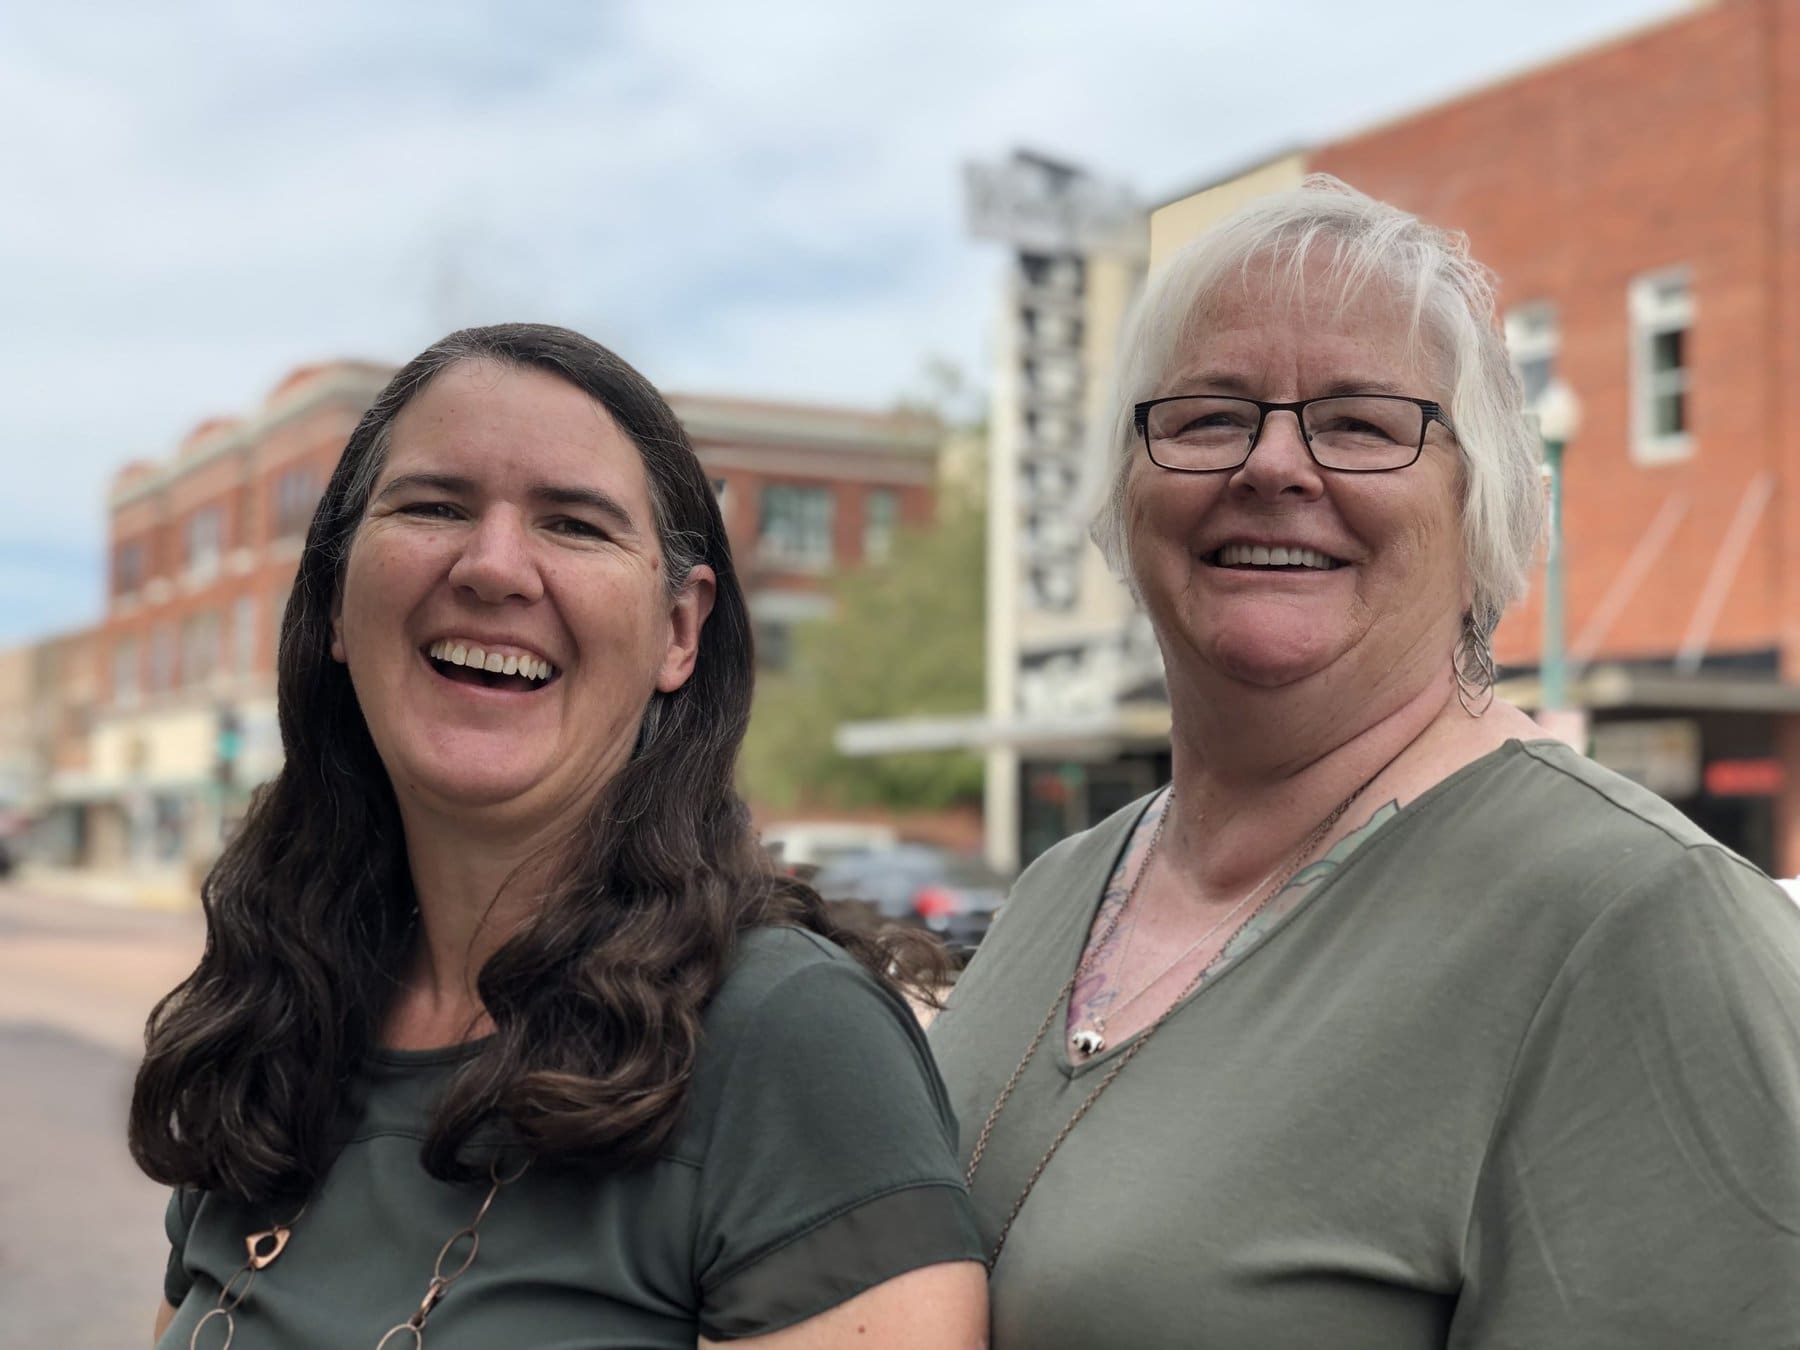 Becky McCray and Deb Brown look happy in downtown Mitchell, South Dakota